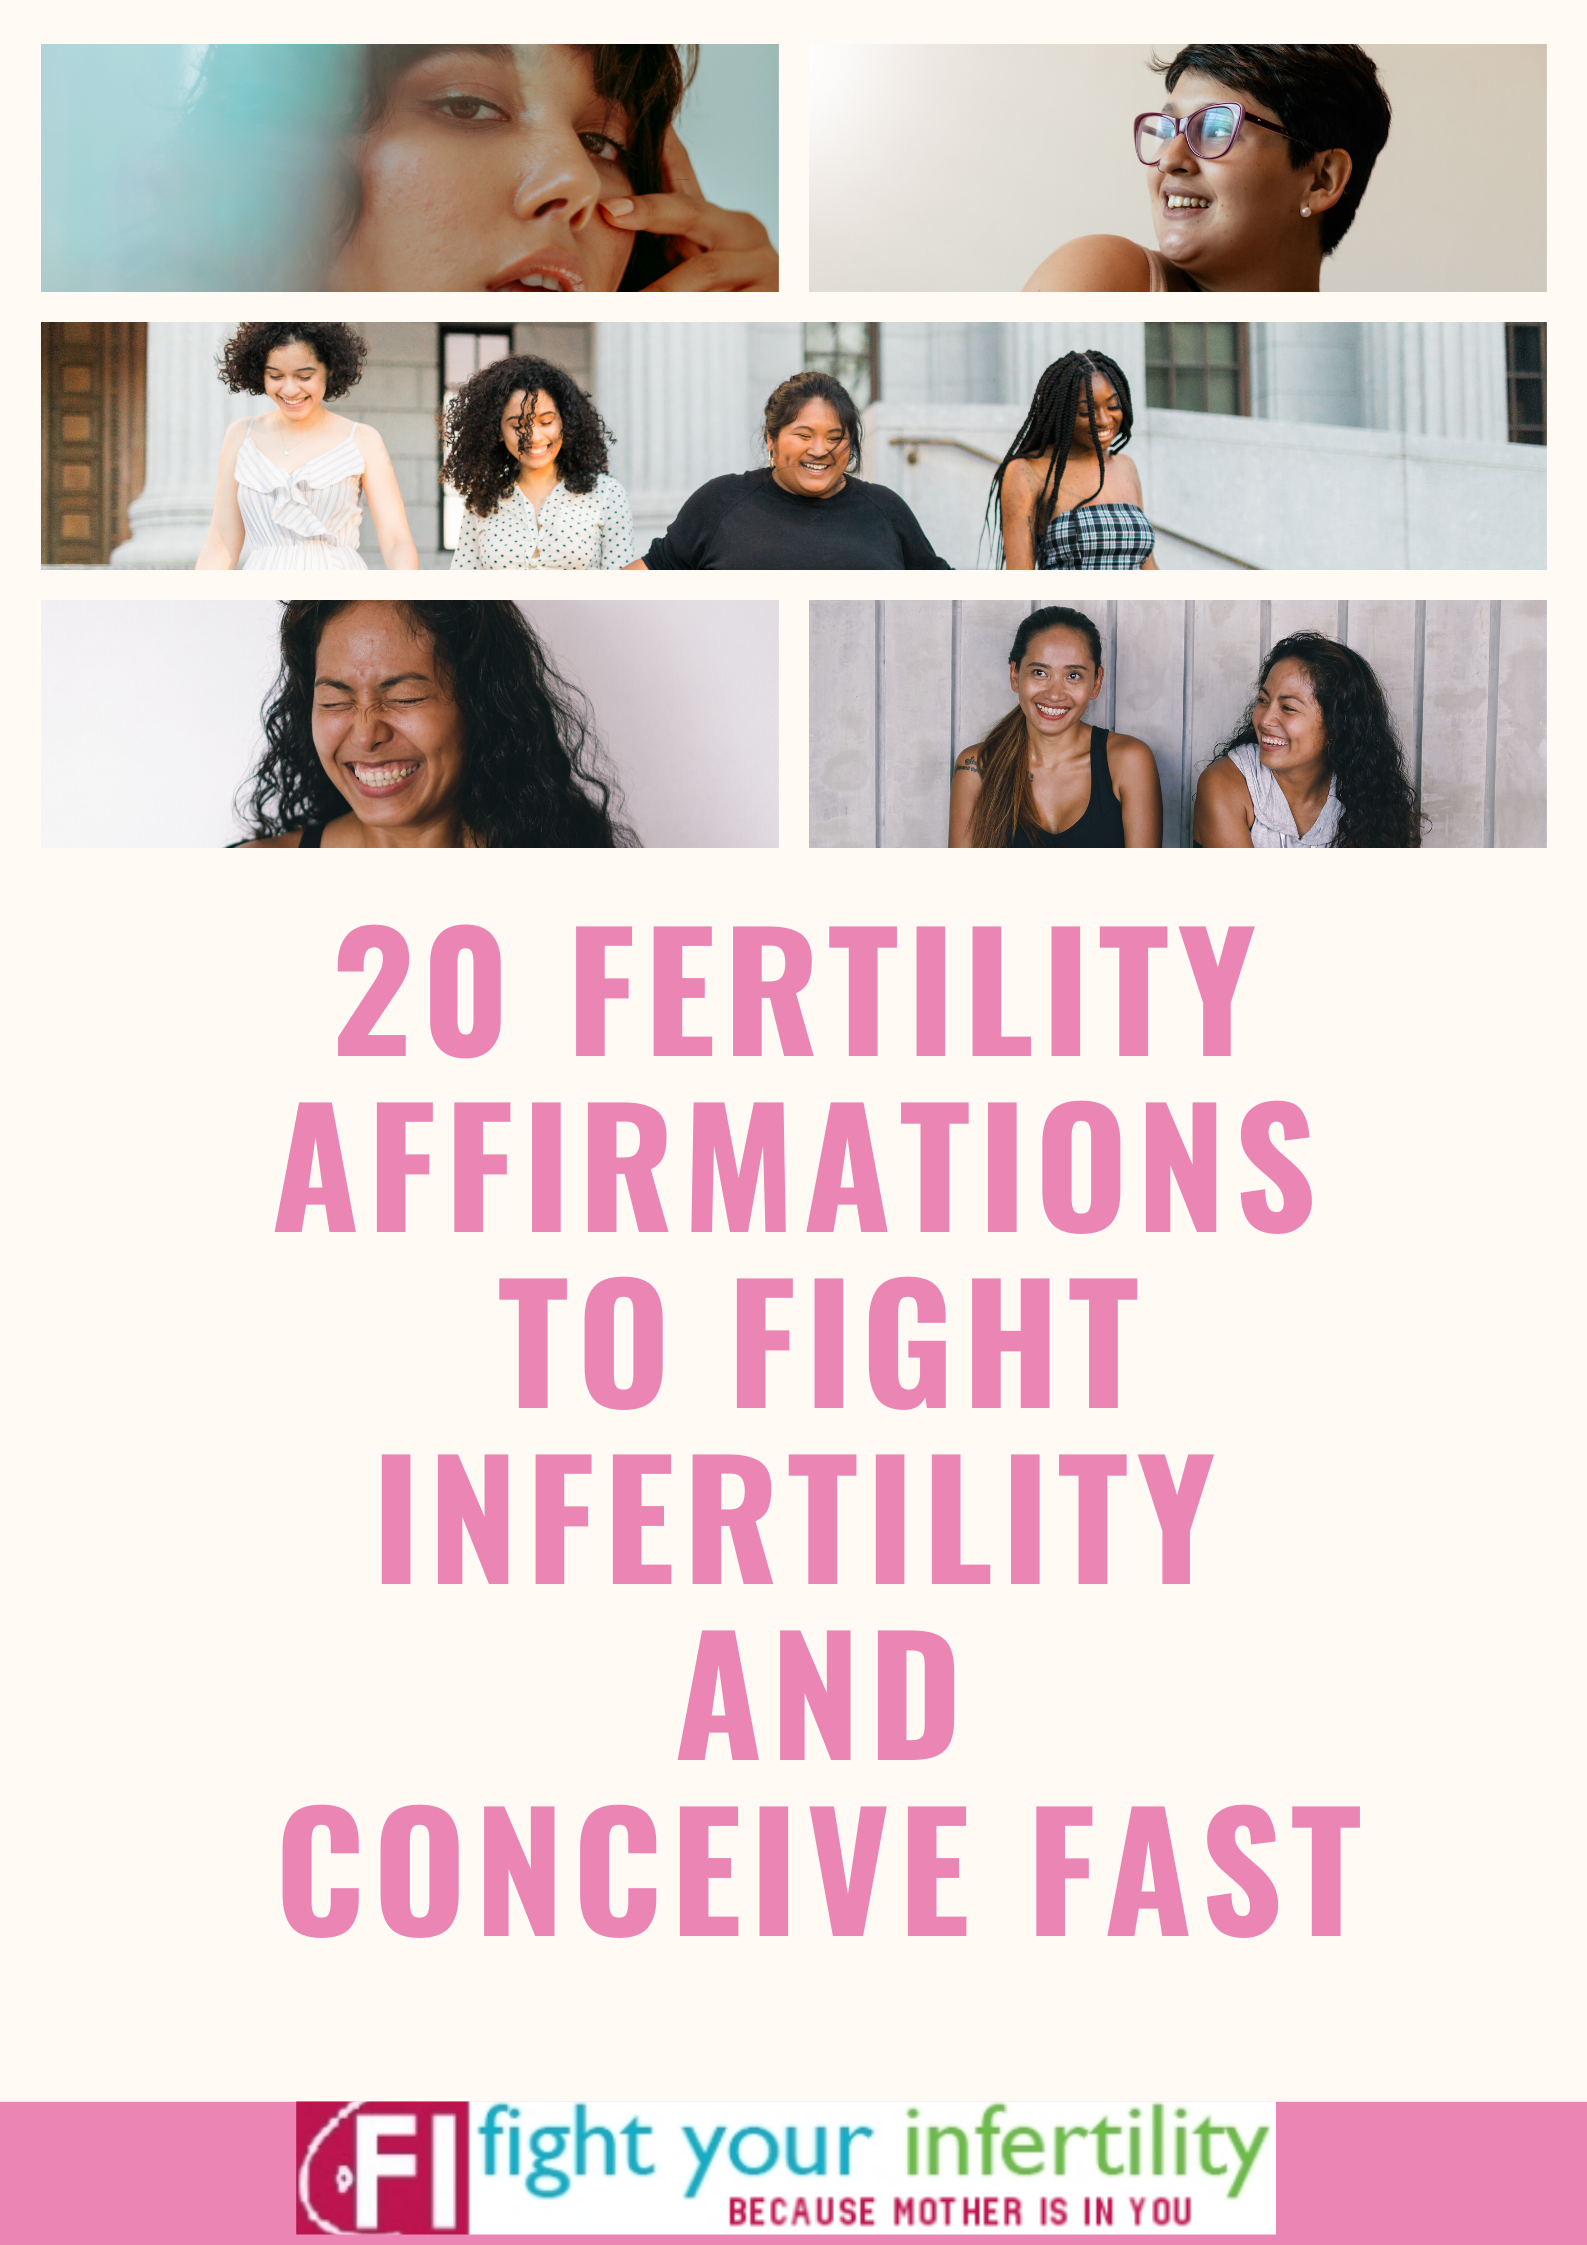 20 Fertility Affirmations to Fight Infertility and Conceive Fast